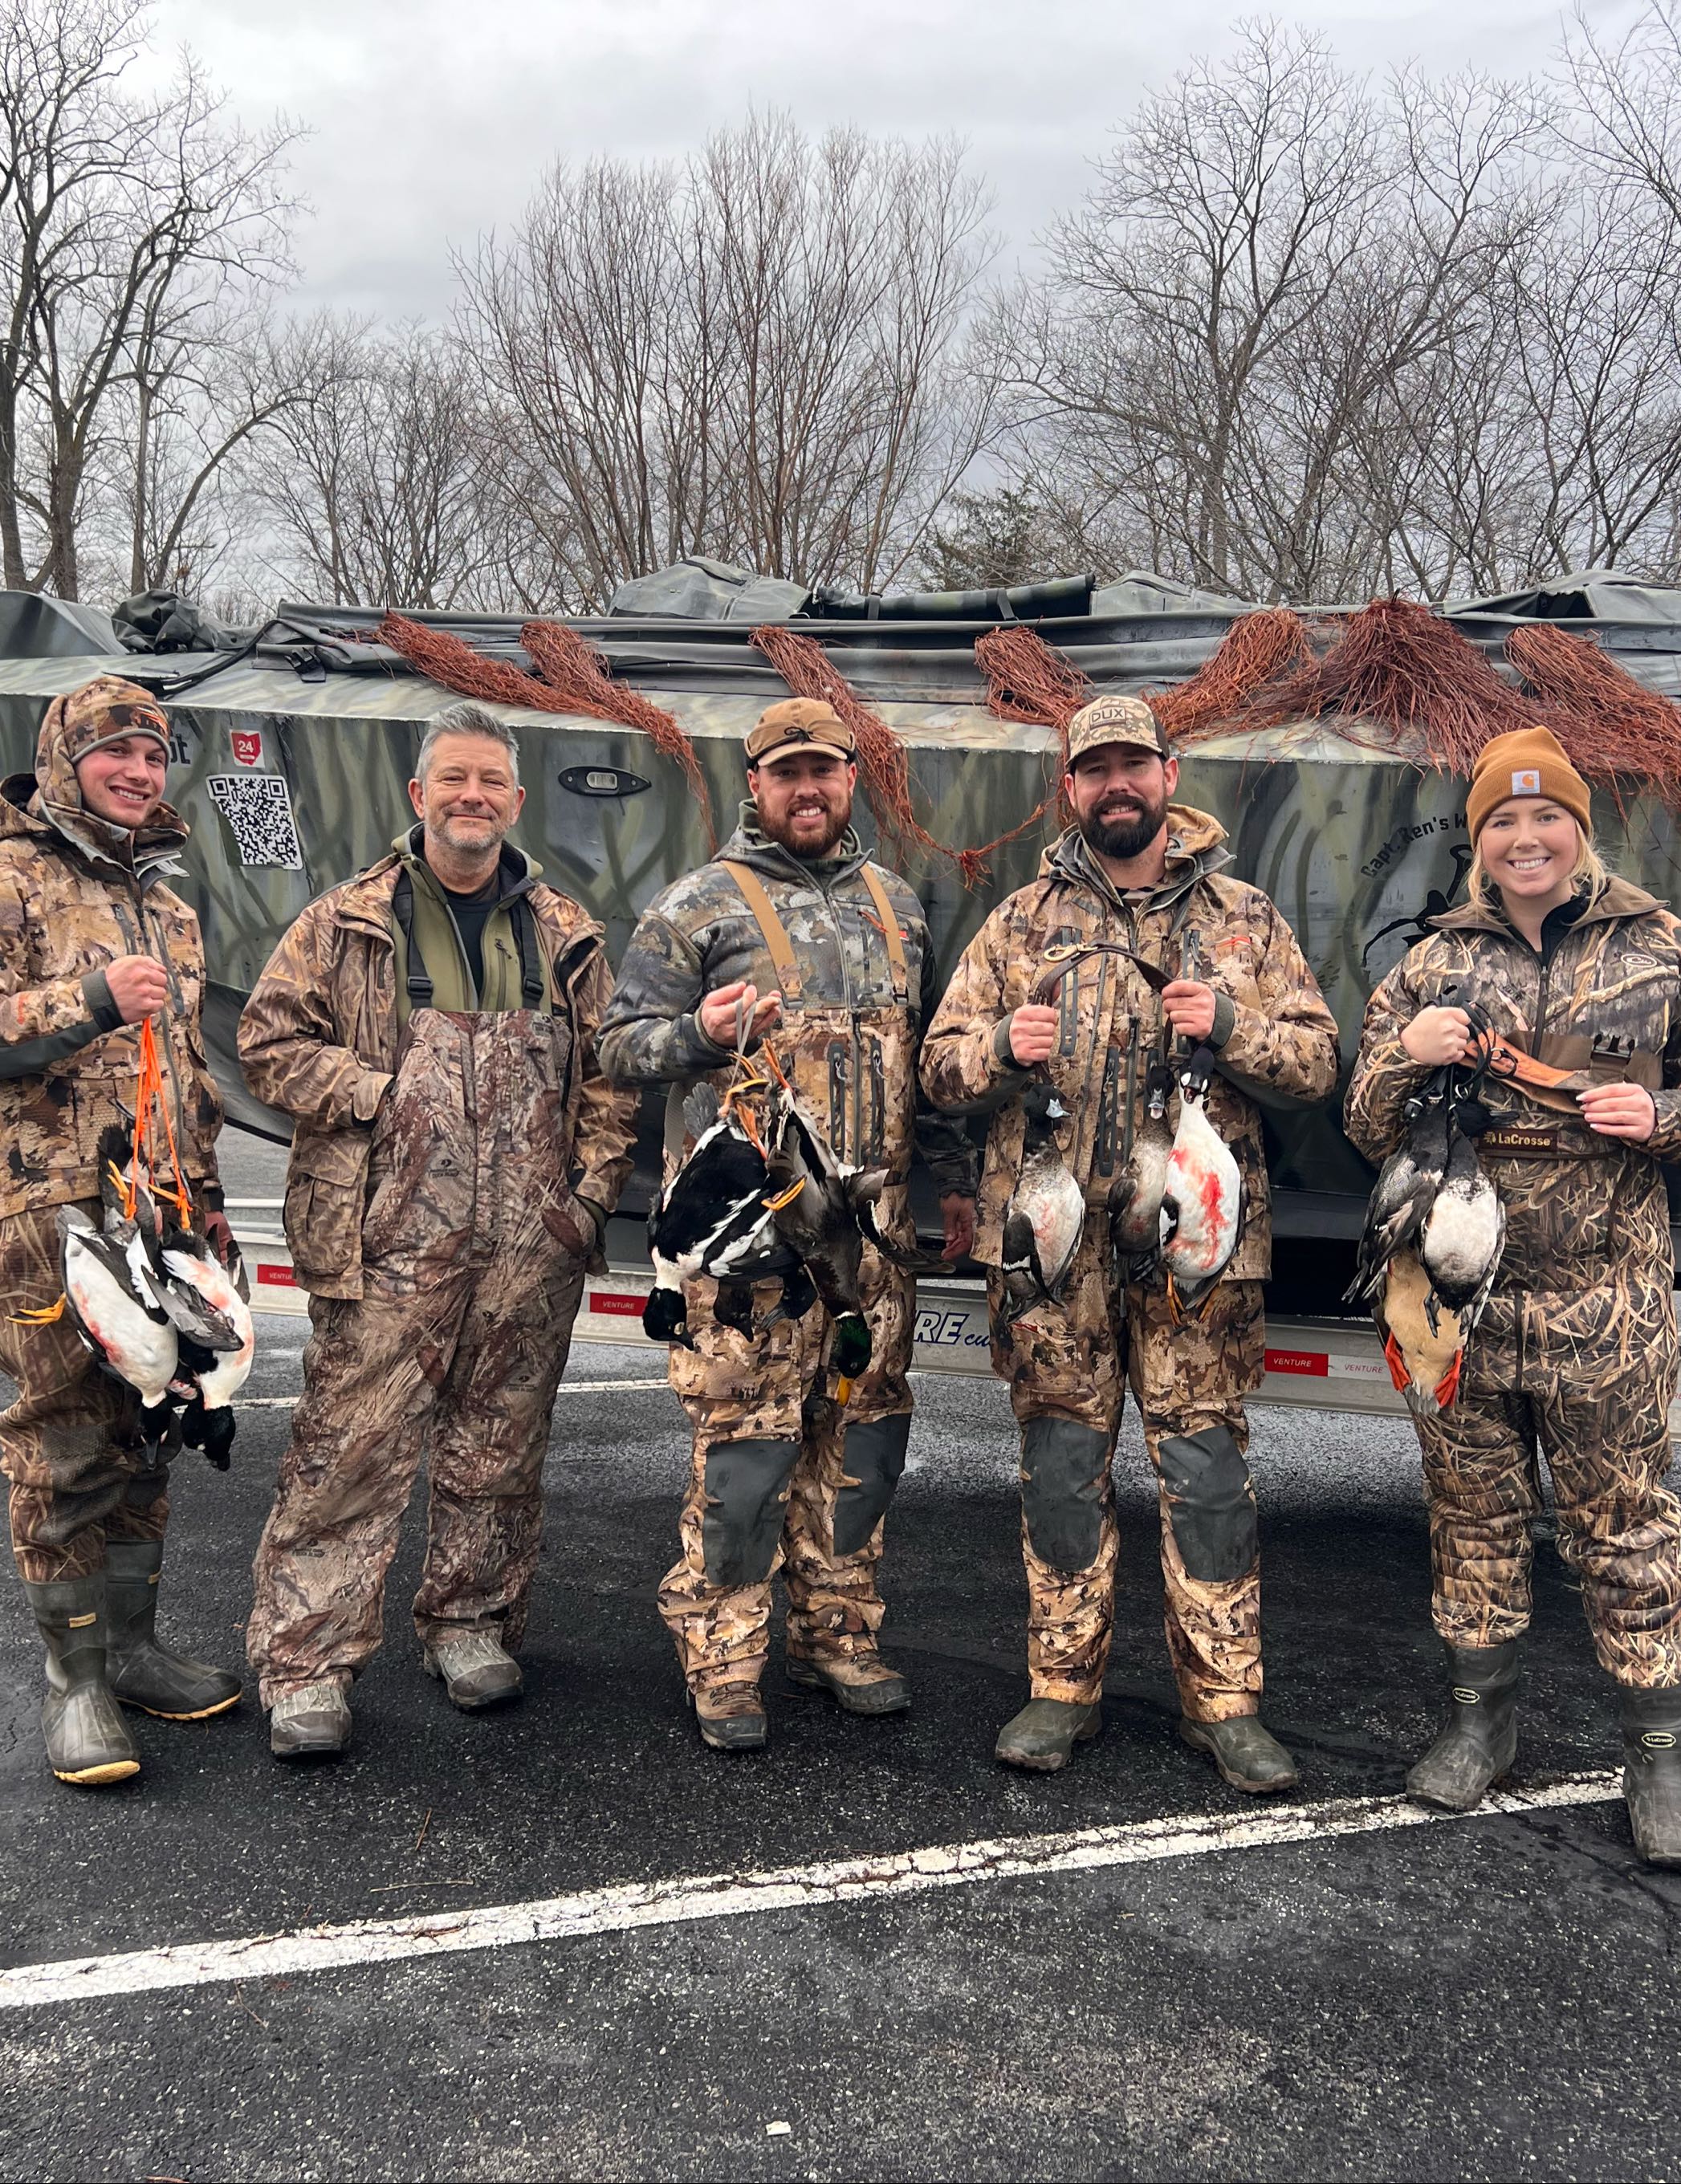 Ohio Duck Hunting Guide Prices Lake Erie Fishing Charters Rates